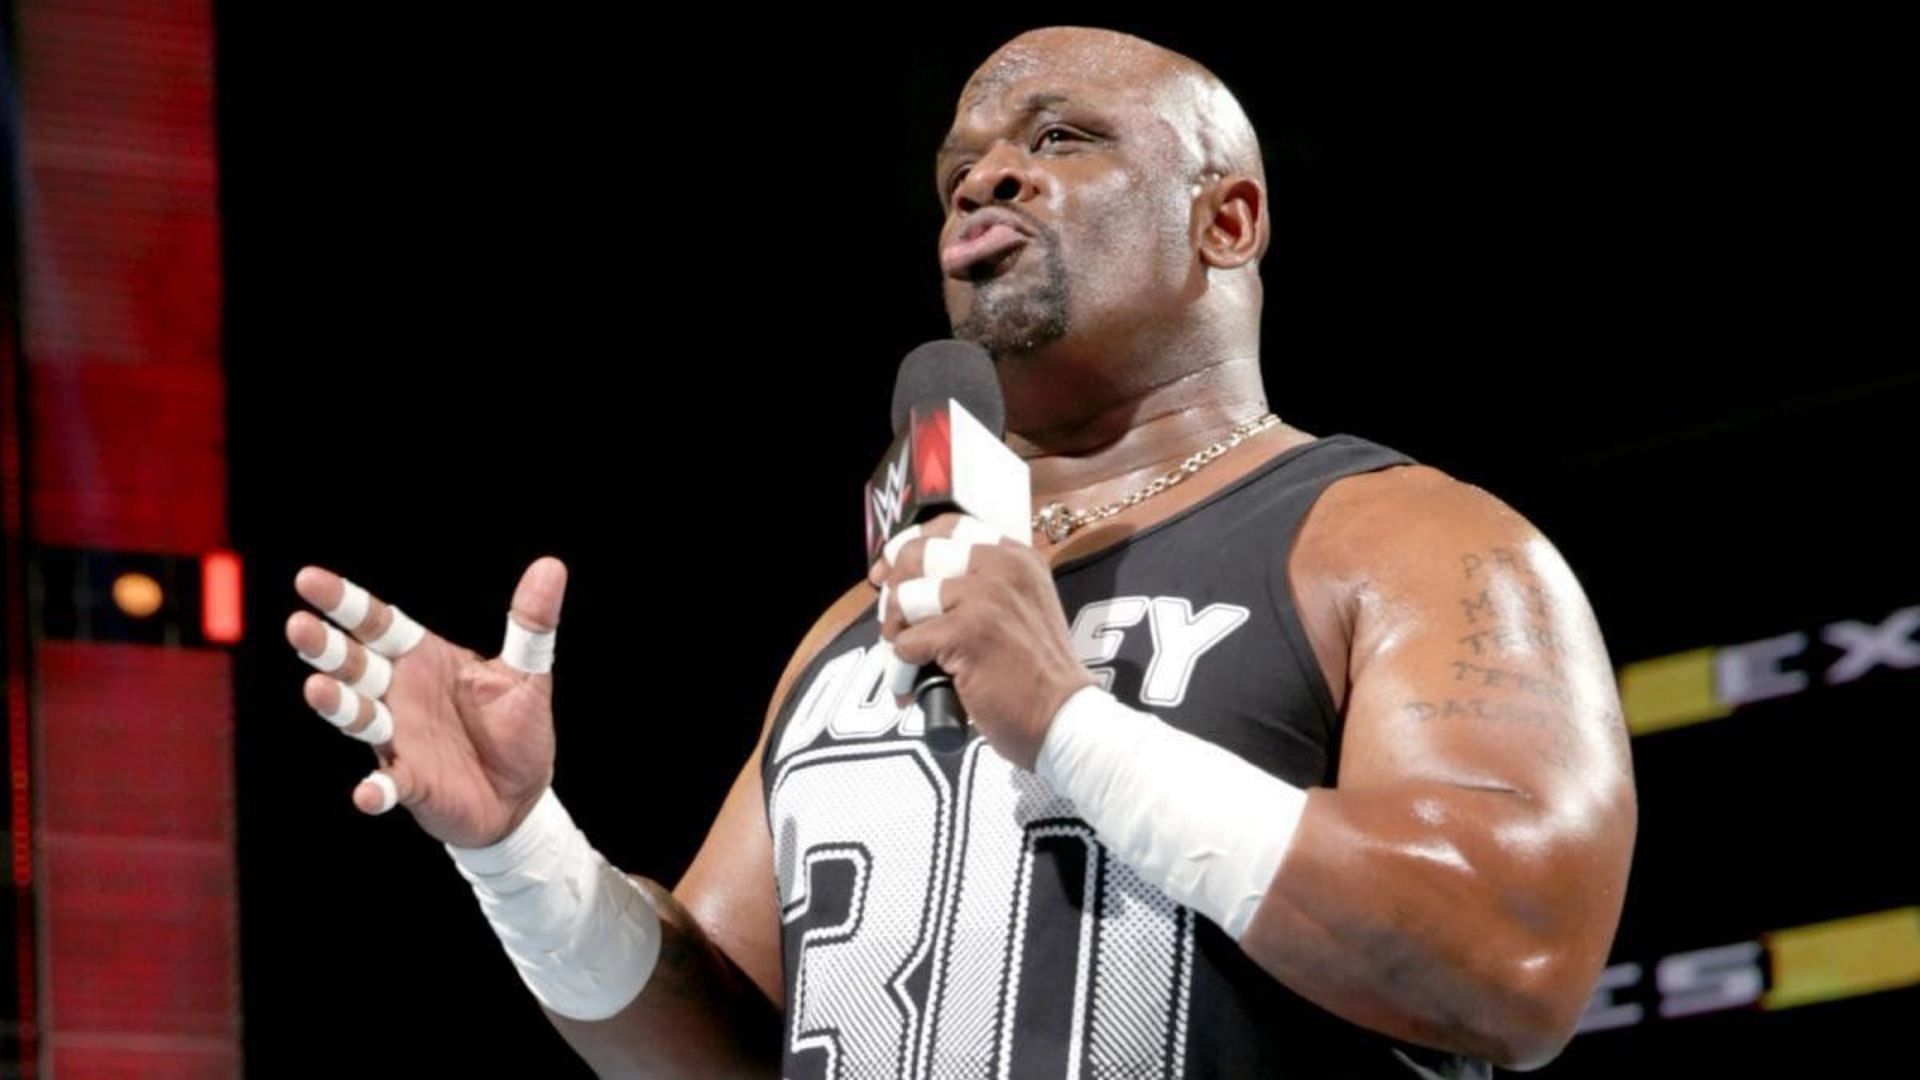 D-Von Dudley wanted to date Stephanie McMahon